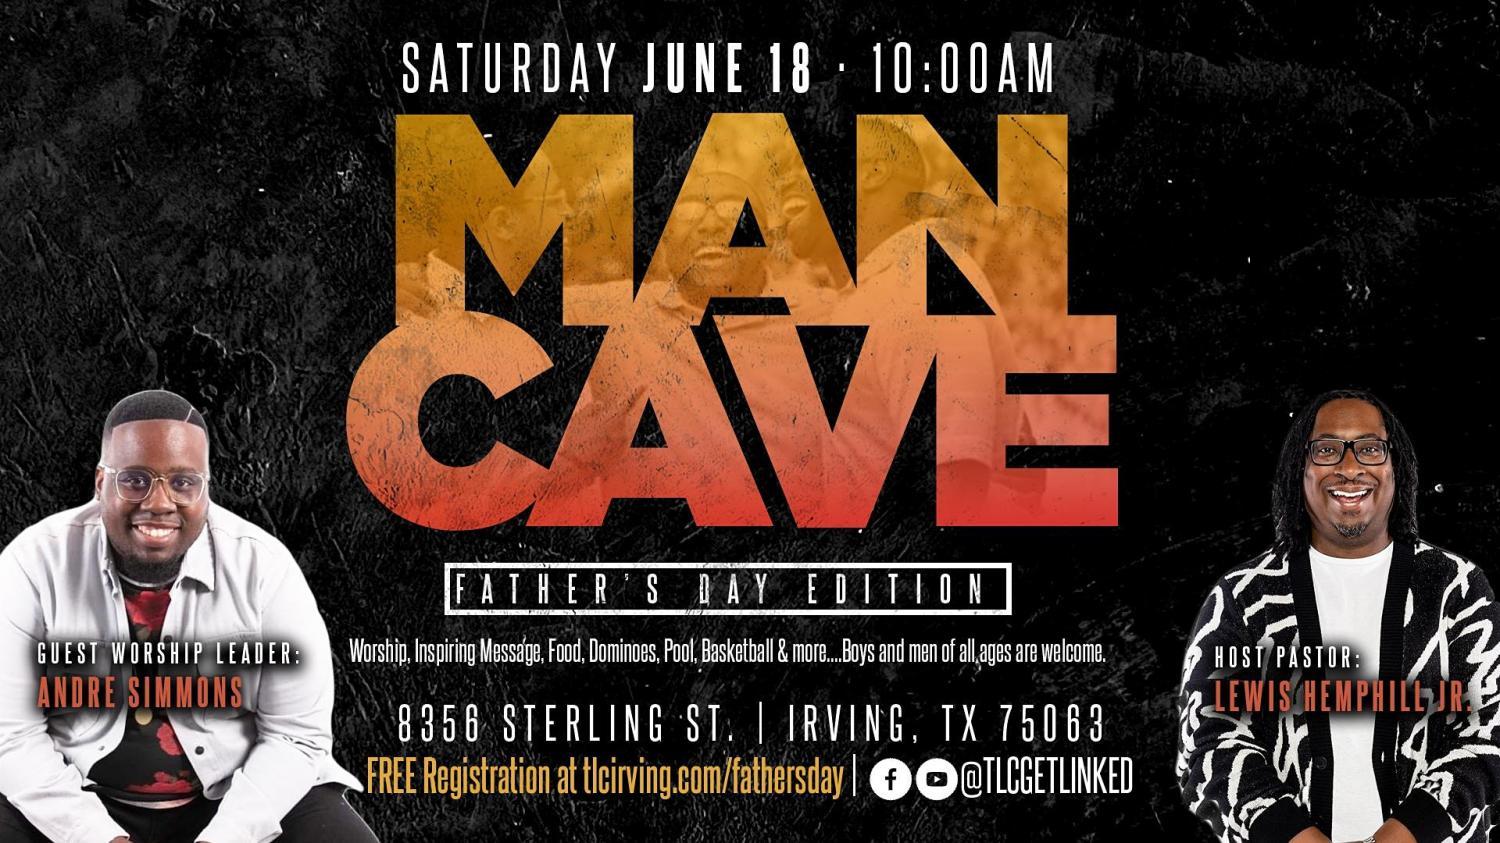 Man Cave: Father's Day Edition at The Link Church